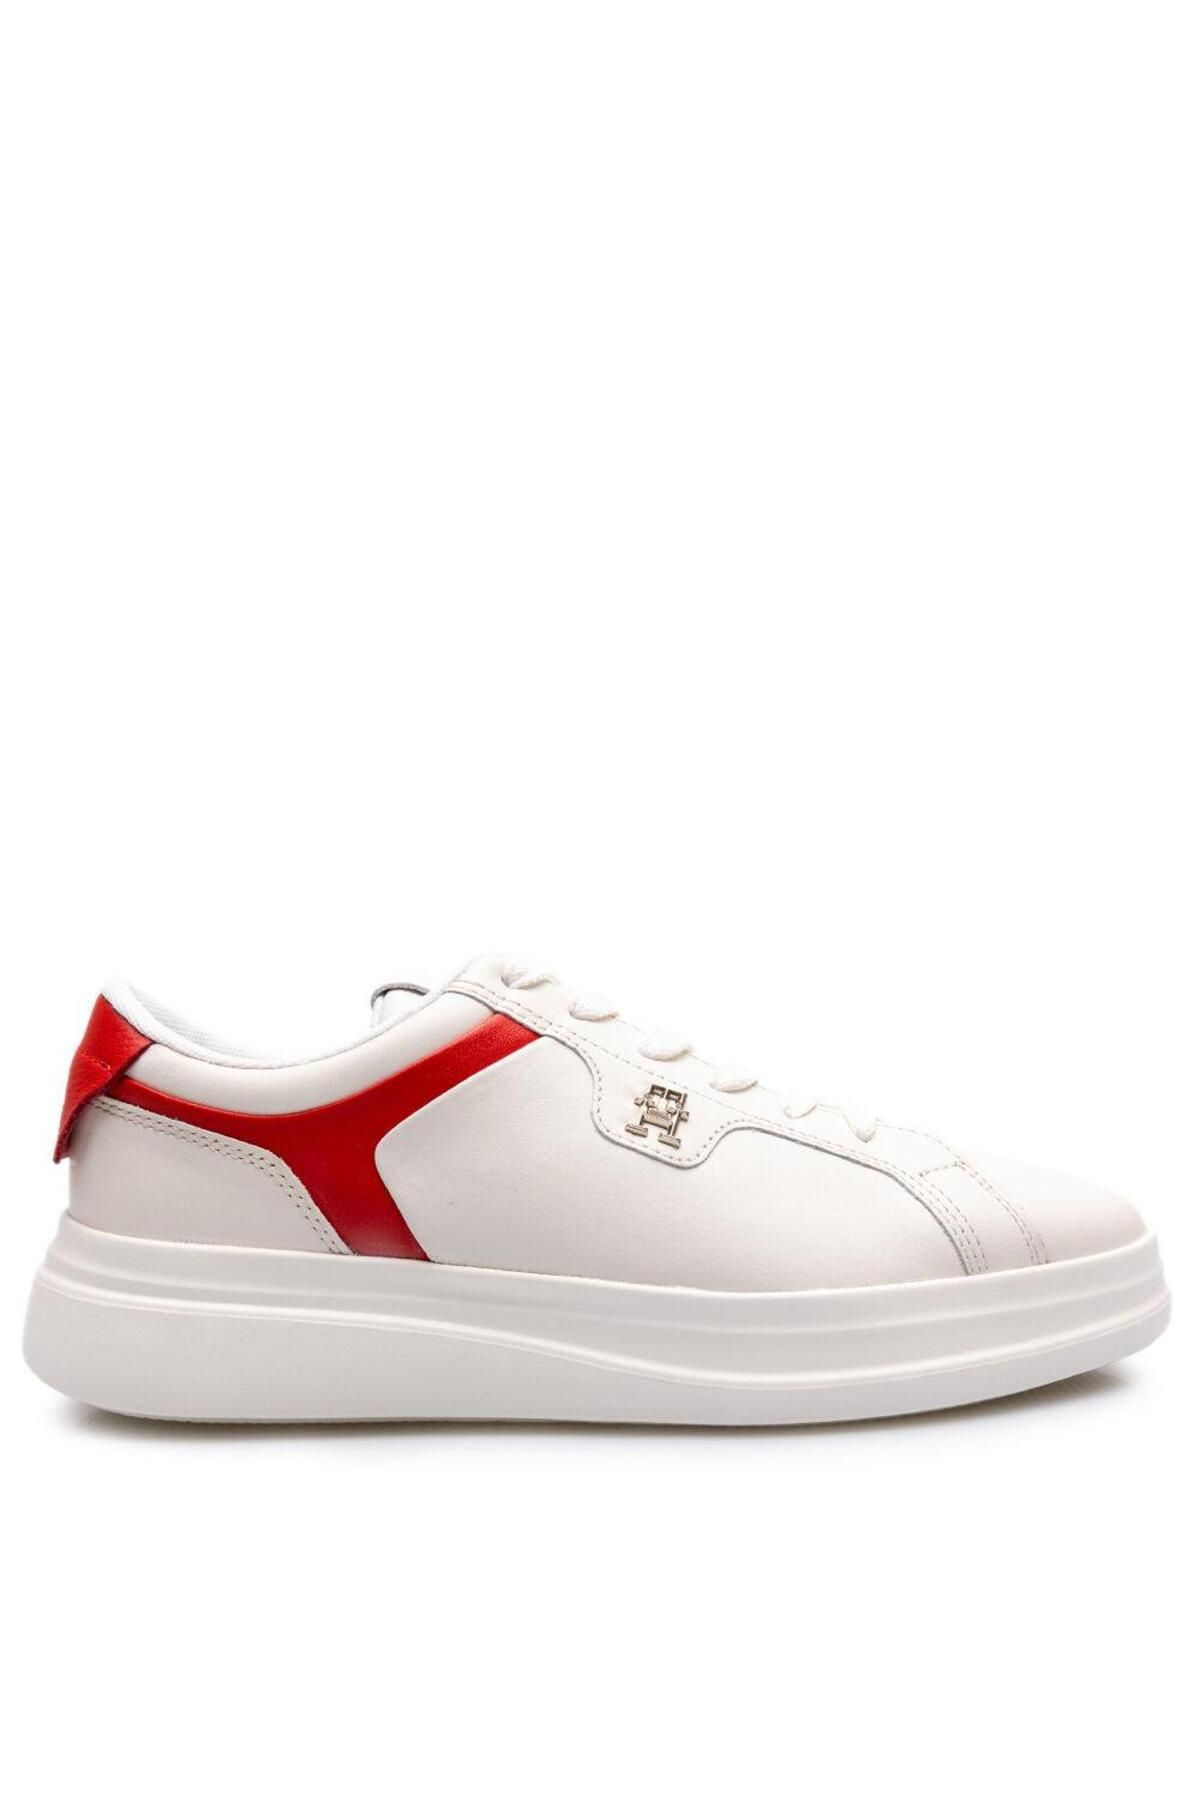 Tommy Hilfiger POINTY COURT SNEAKER